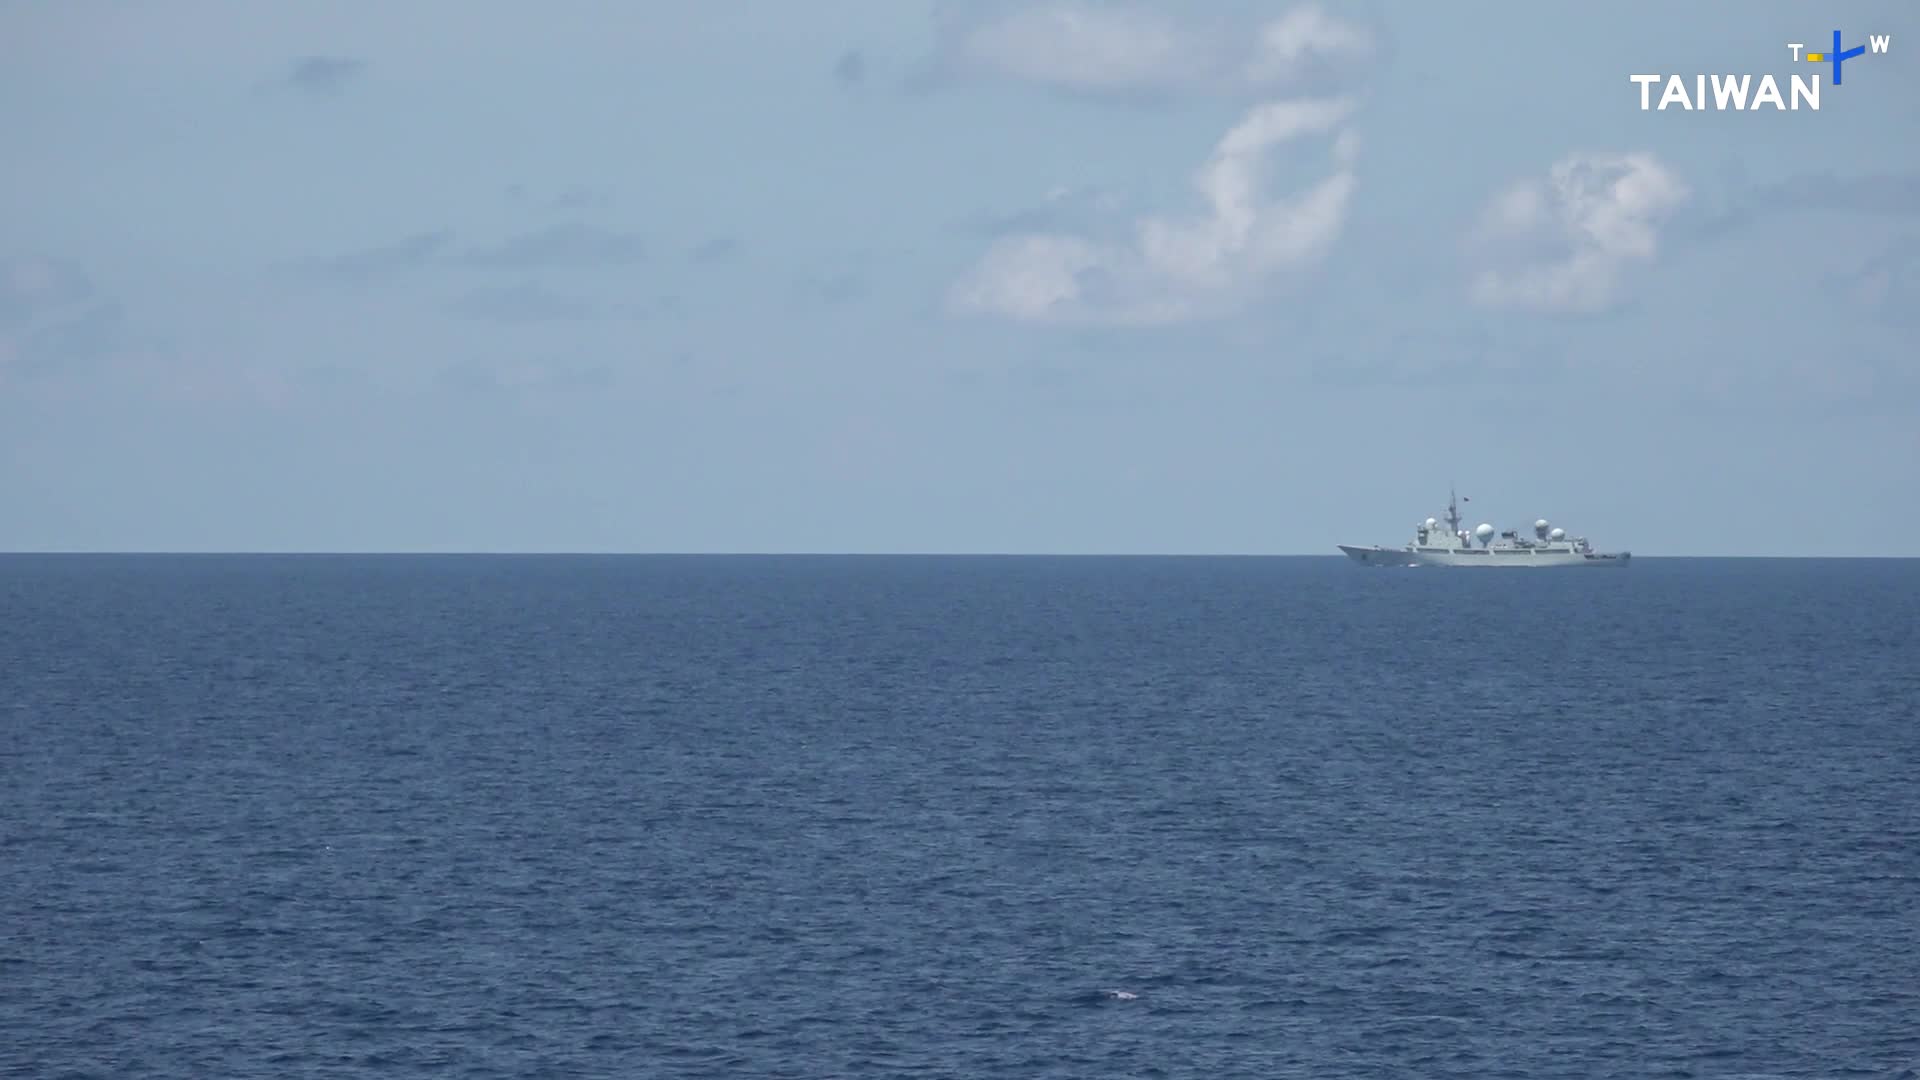 Clashes, Standoffs in South China Sea as Global Powers Vie for Influence - TaiwanPlus News